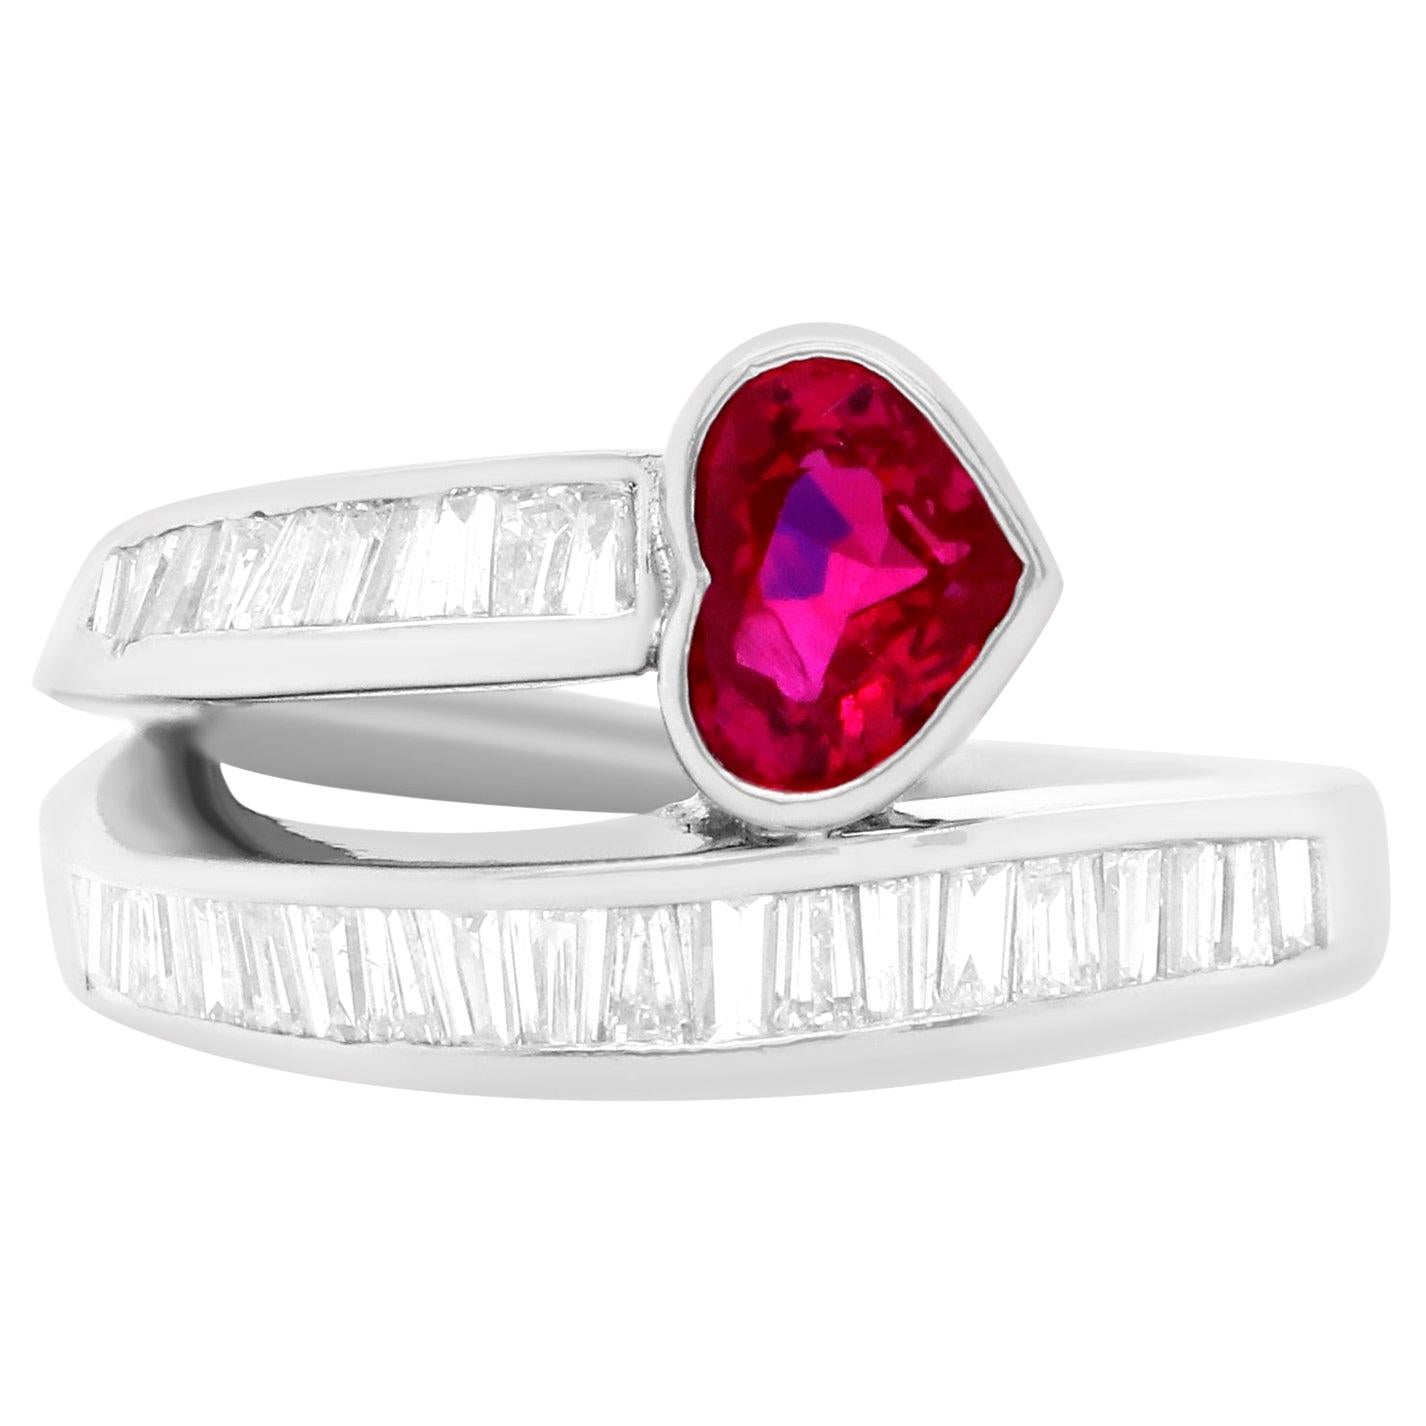 1.12 Carat Heart Shaped Ruby and Diamond Ring